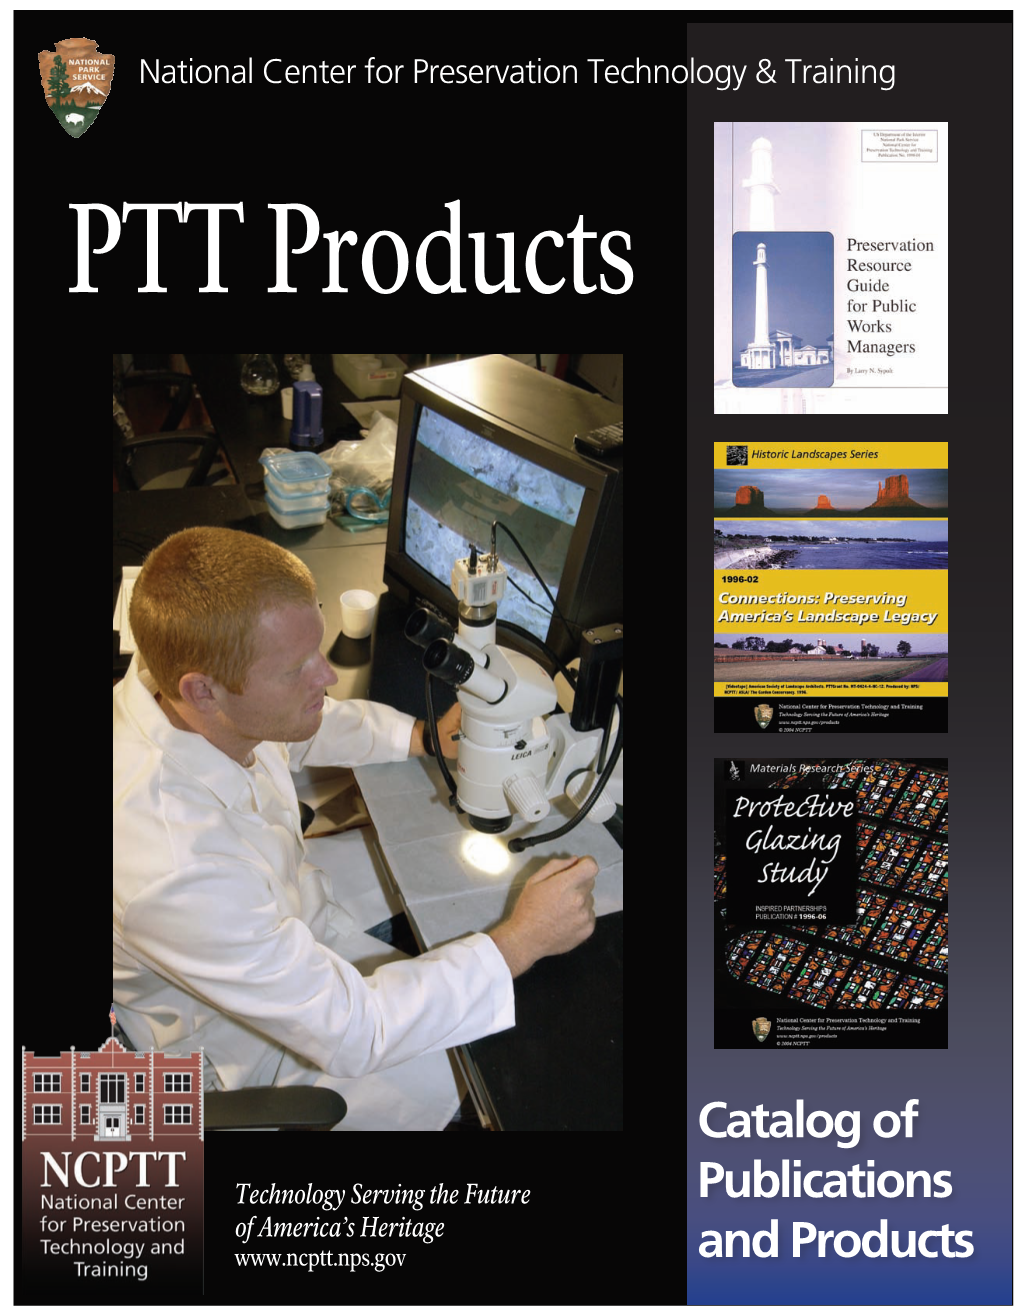 Catalog of Publications and Products